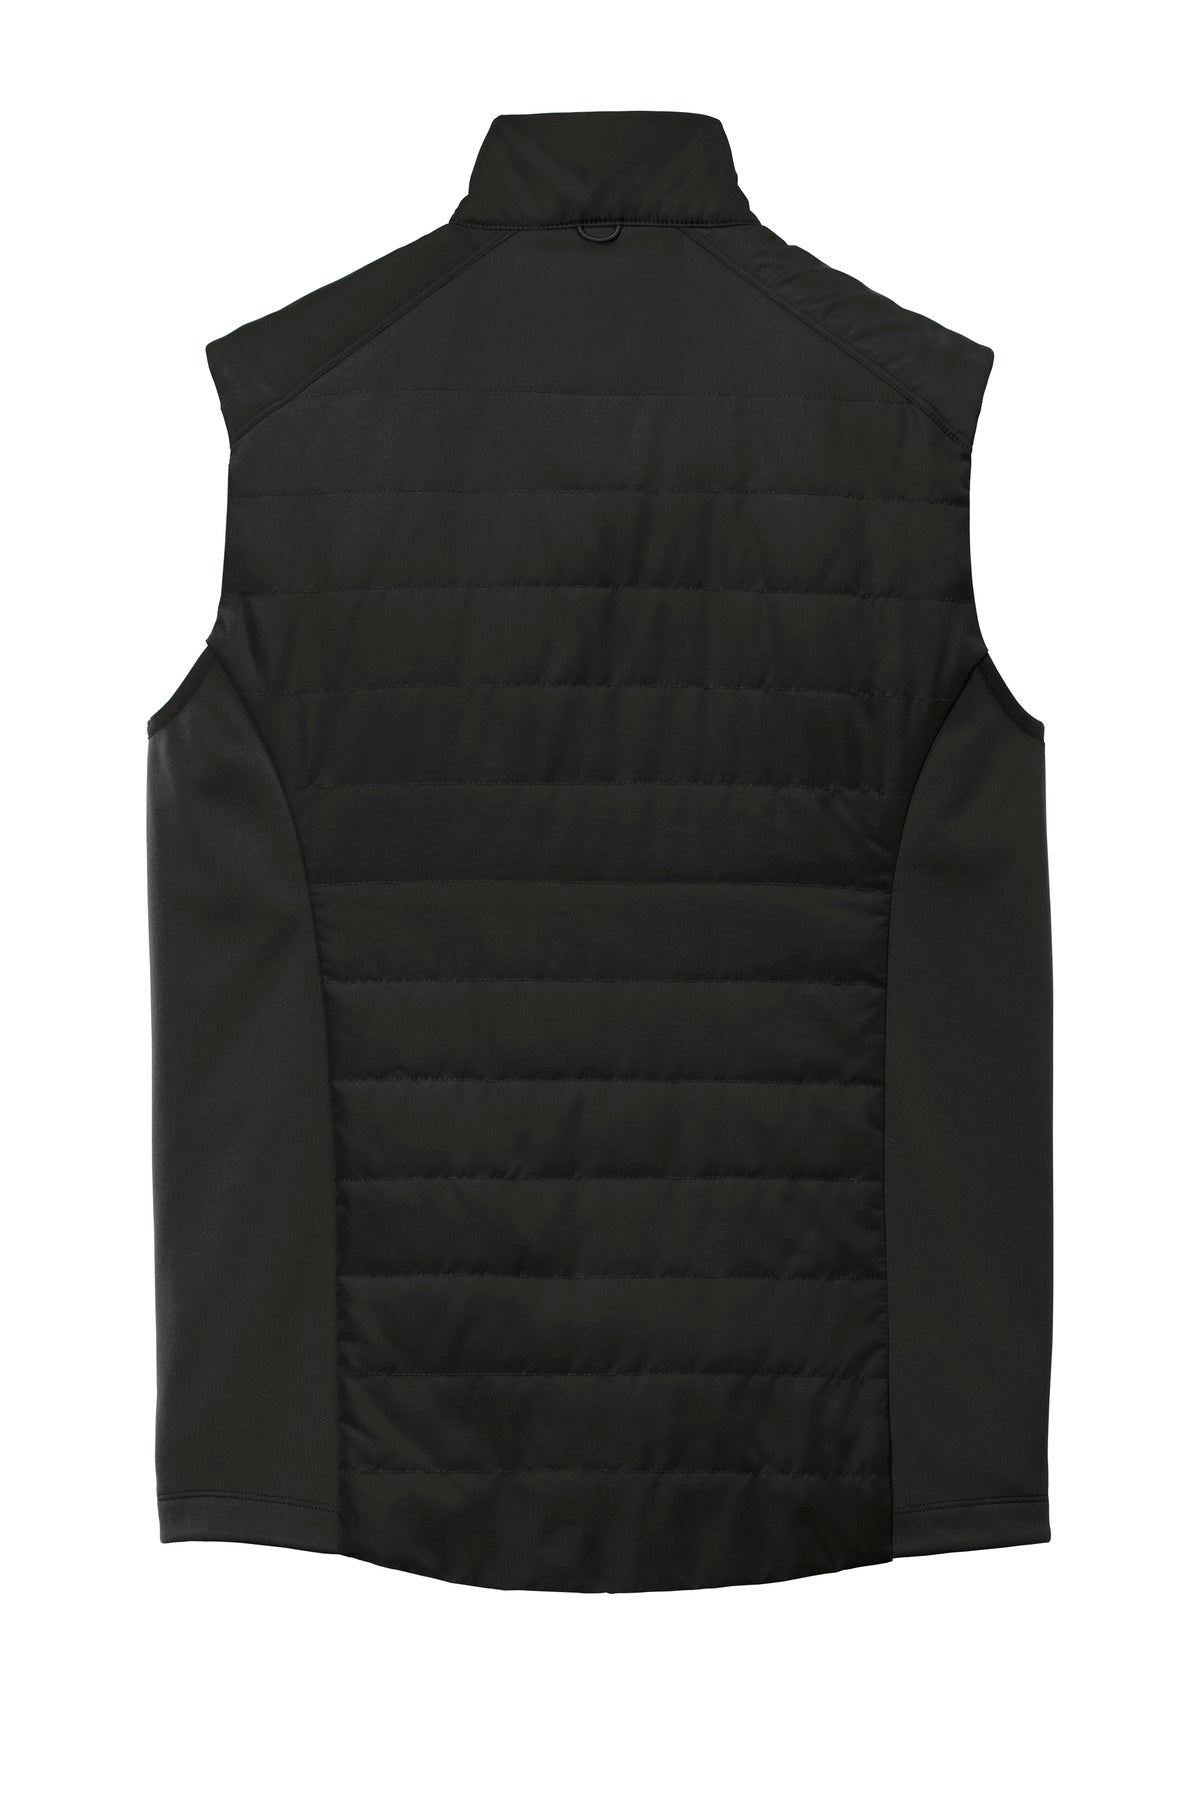 Port Authority Collective Insulated Vest. J903